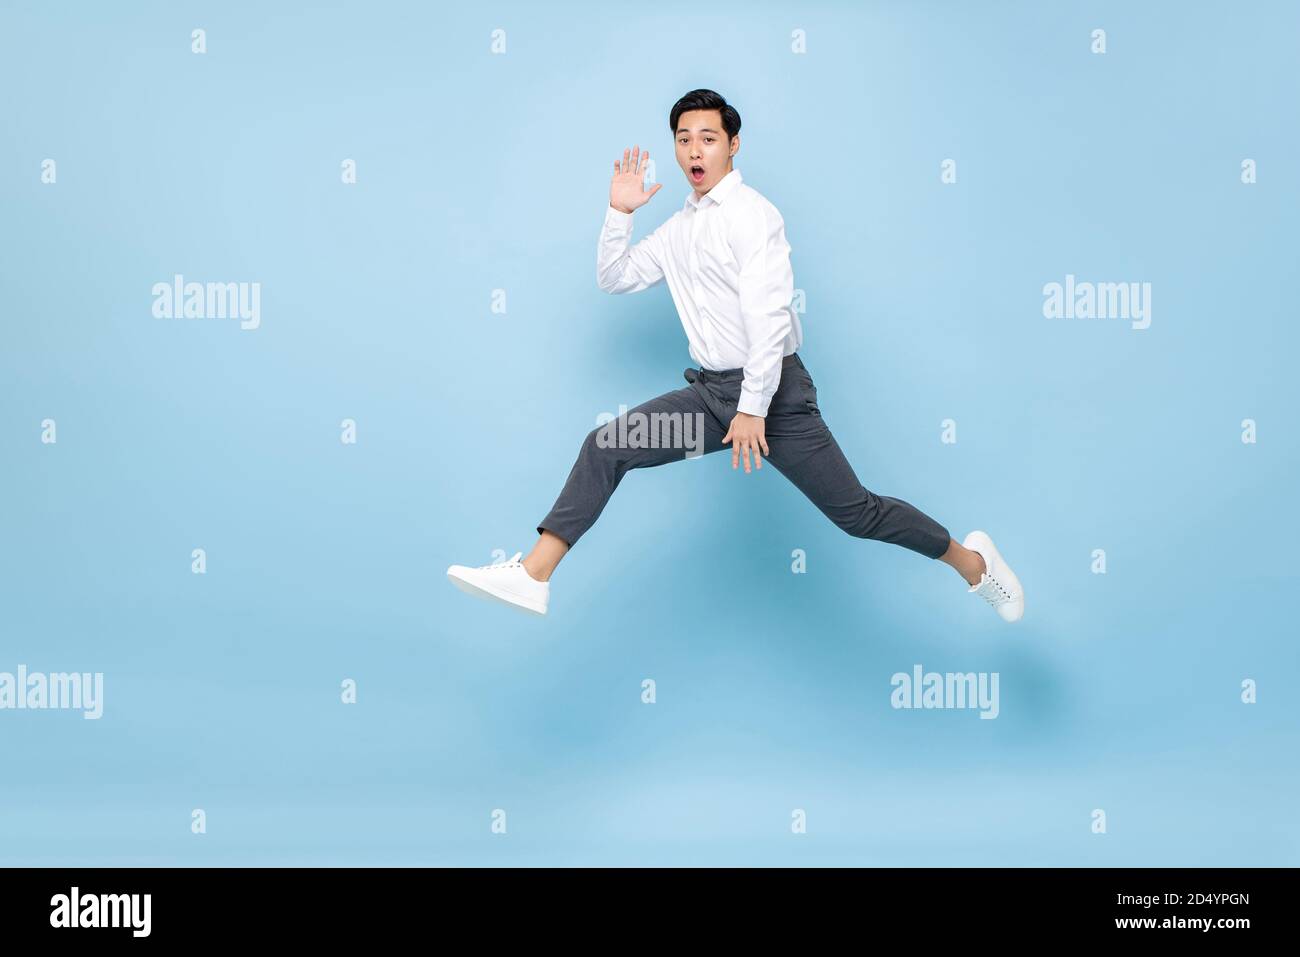 Fun energetic Asian man in semi formal clothes jumping in mid air isolated on light blue background Stock Photo